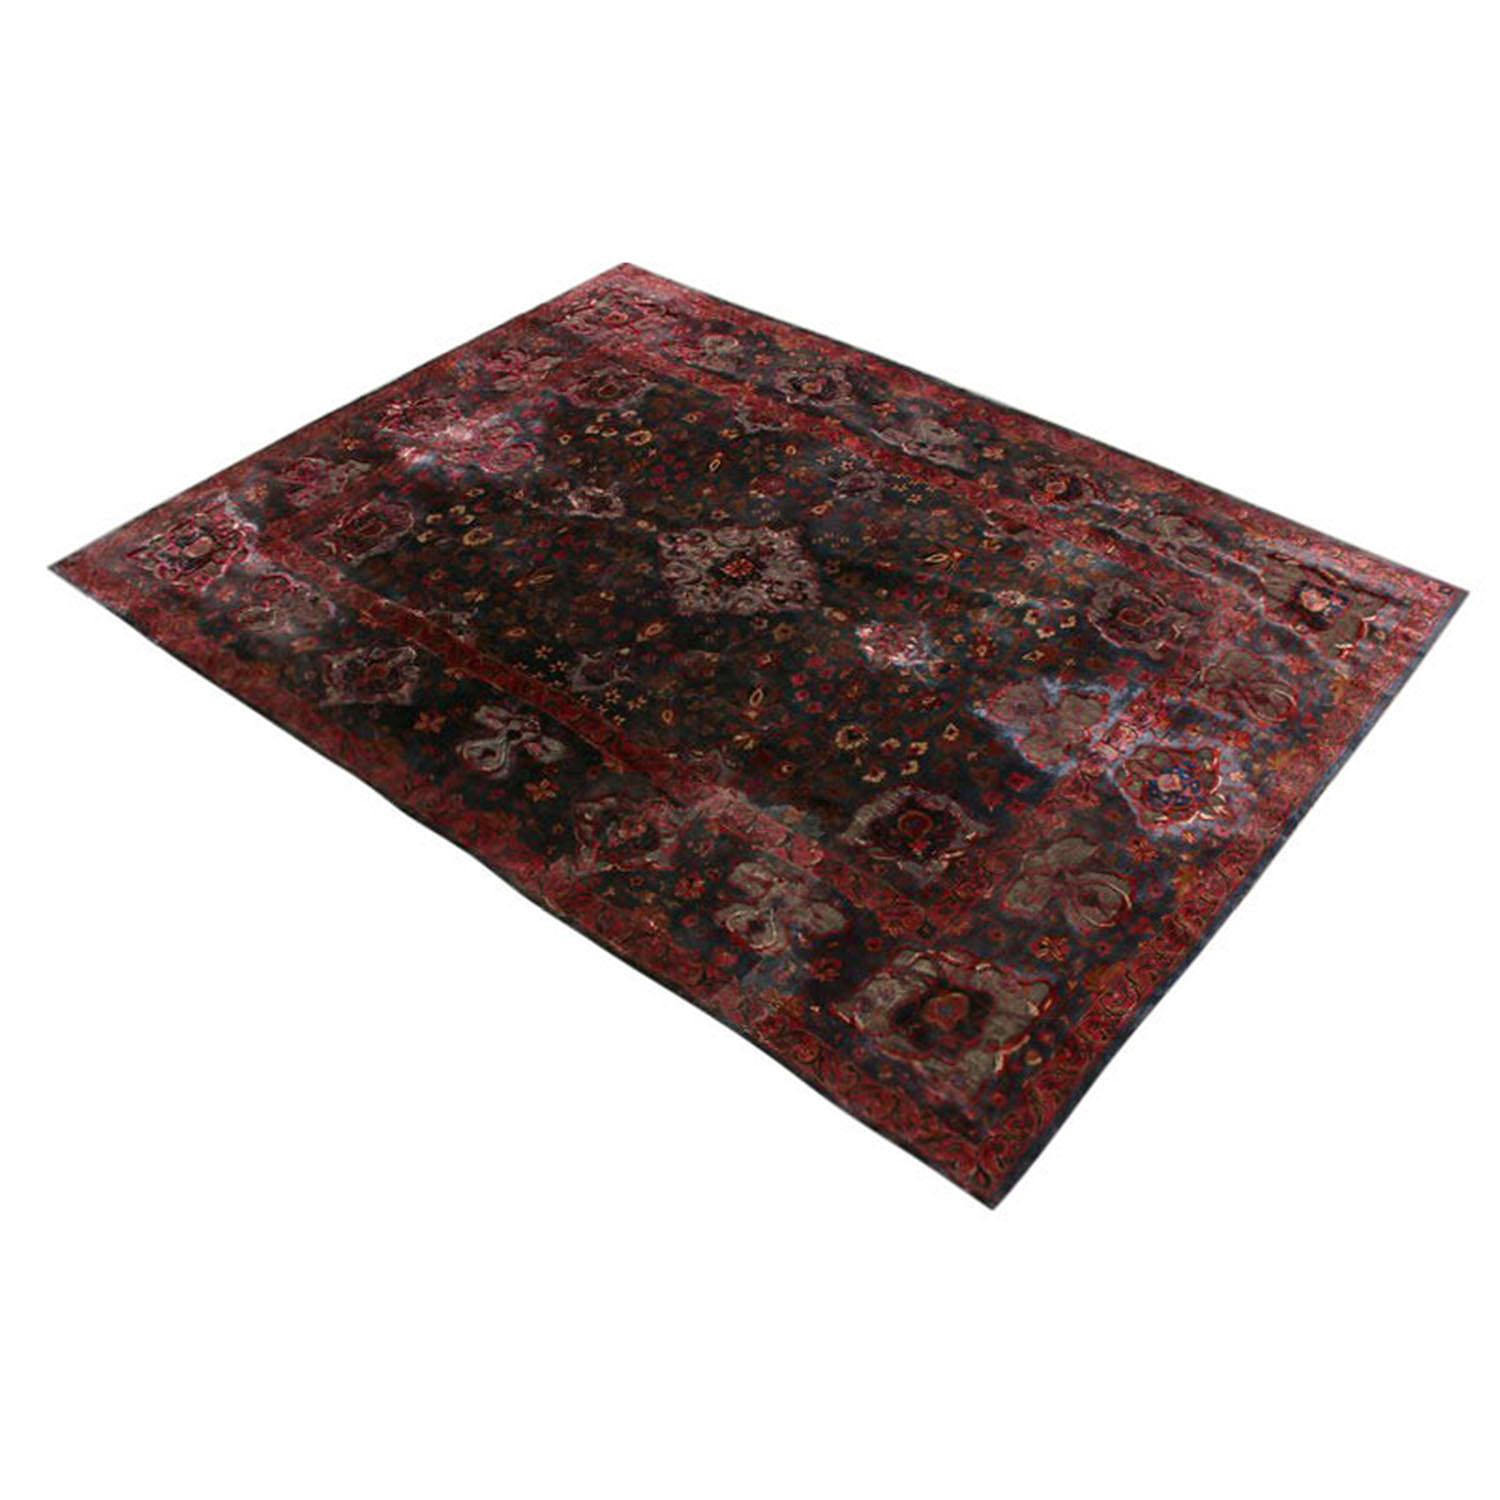 Hand knotted in Persia originating between 1910-1920, this antique Kashan rug presents distinct value in a marriage of appealing size, unique colorway and sheen metallic-silk blend complementing the rich notes of violet purple and blue. Further